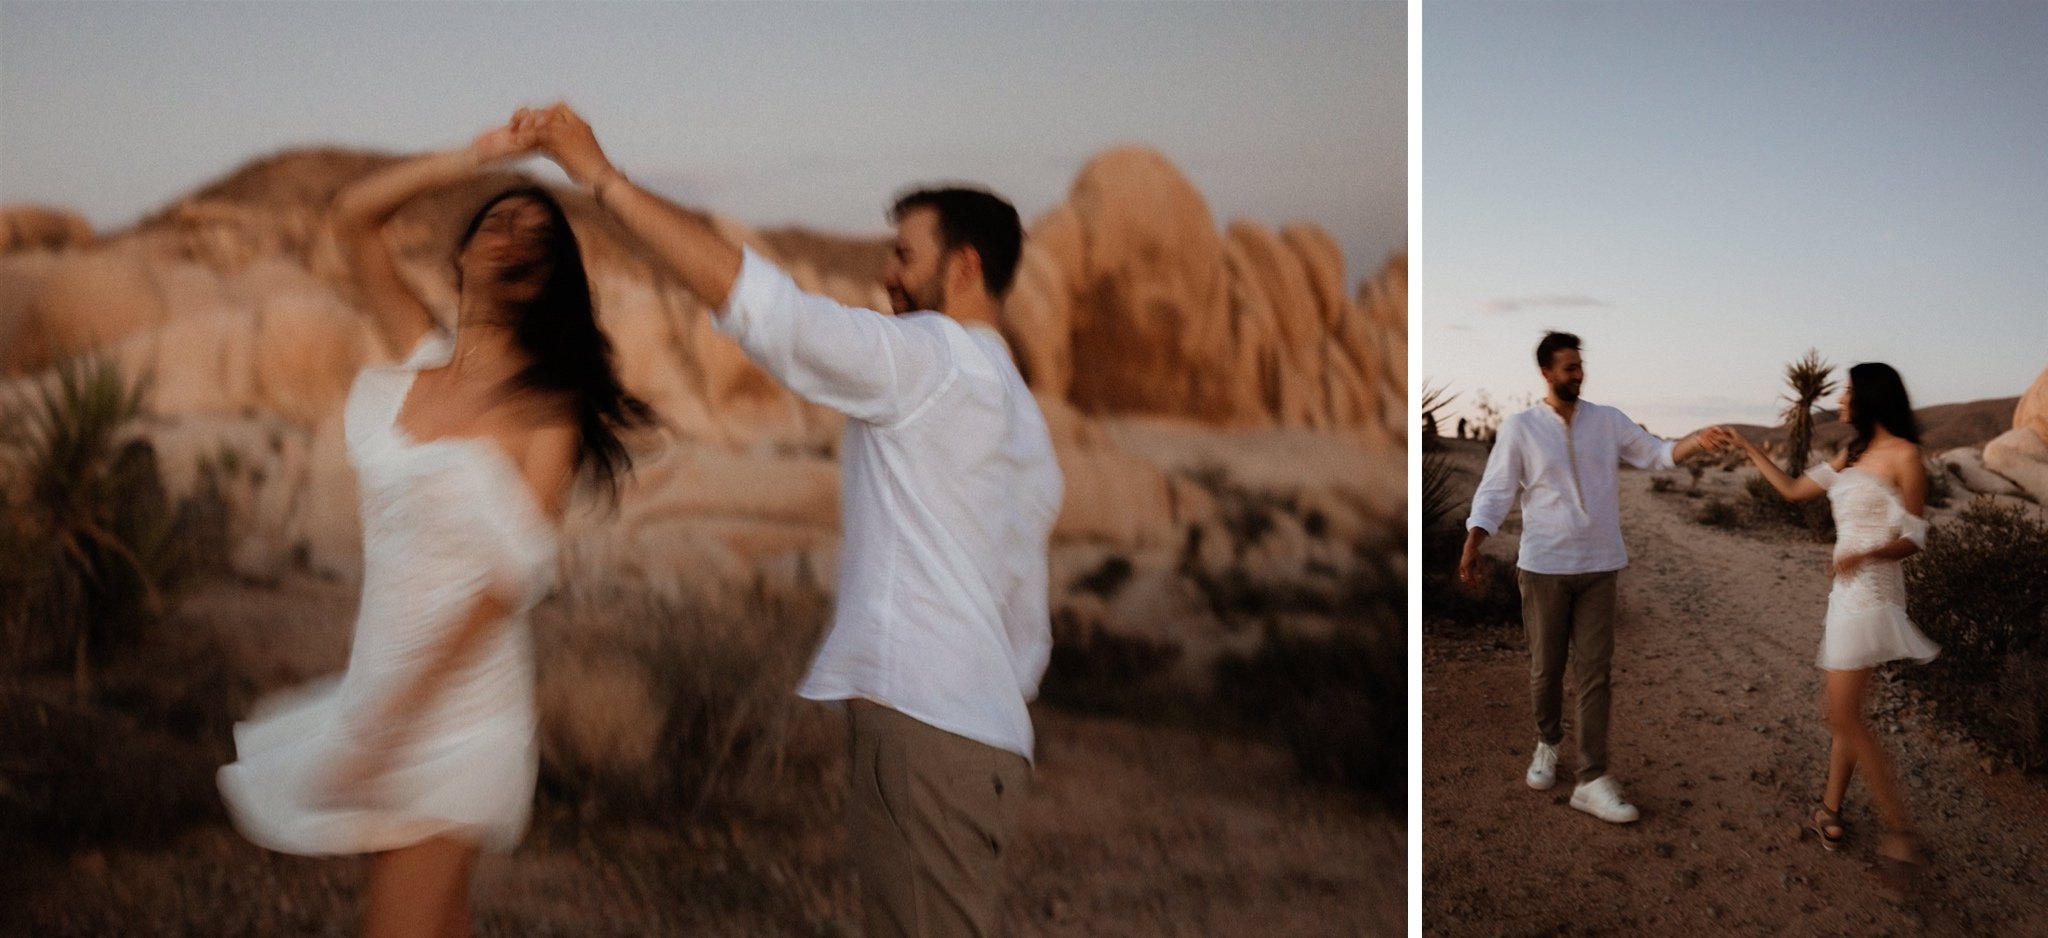 Joshua Tree Couples Session Surprise Proposal - Will Khoury Photography_51.jpg